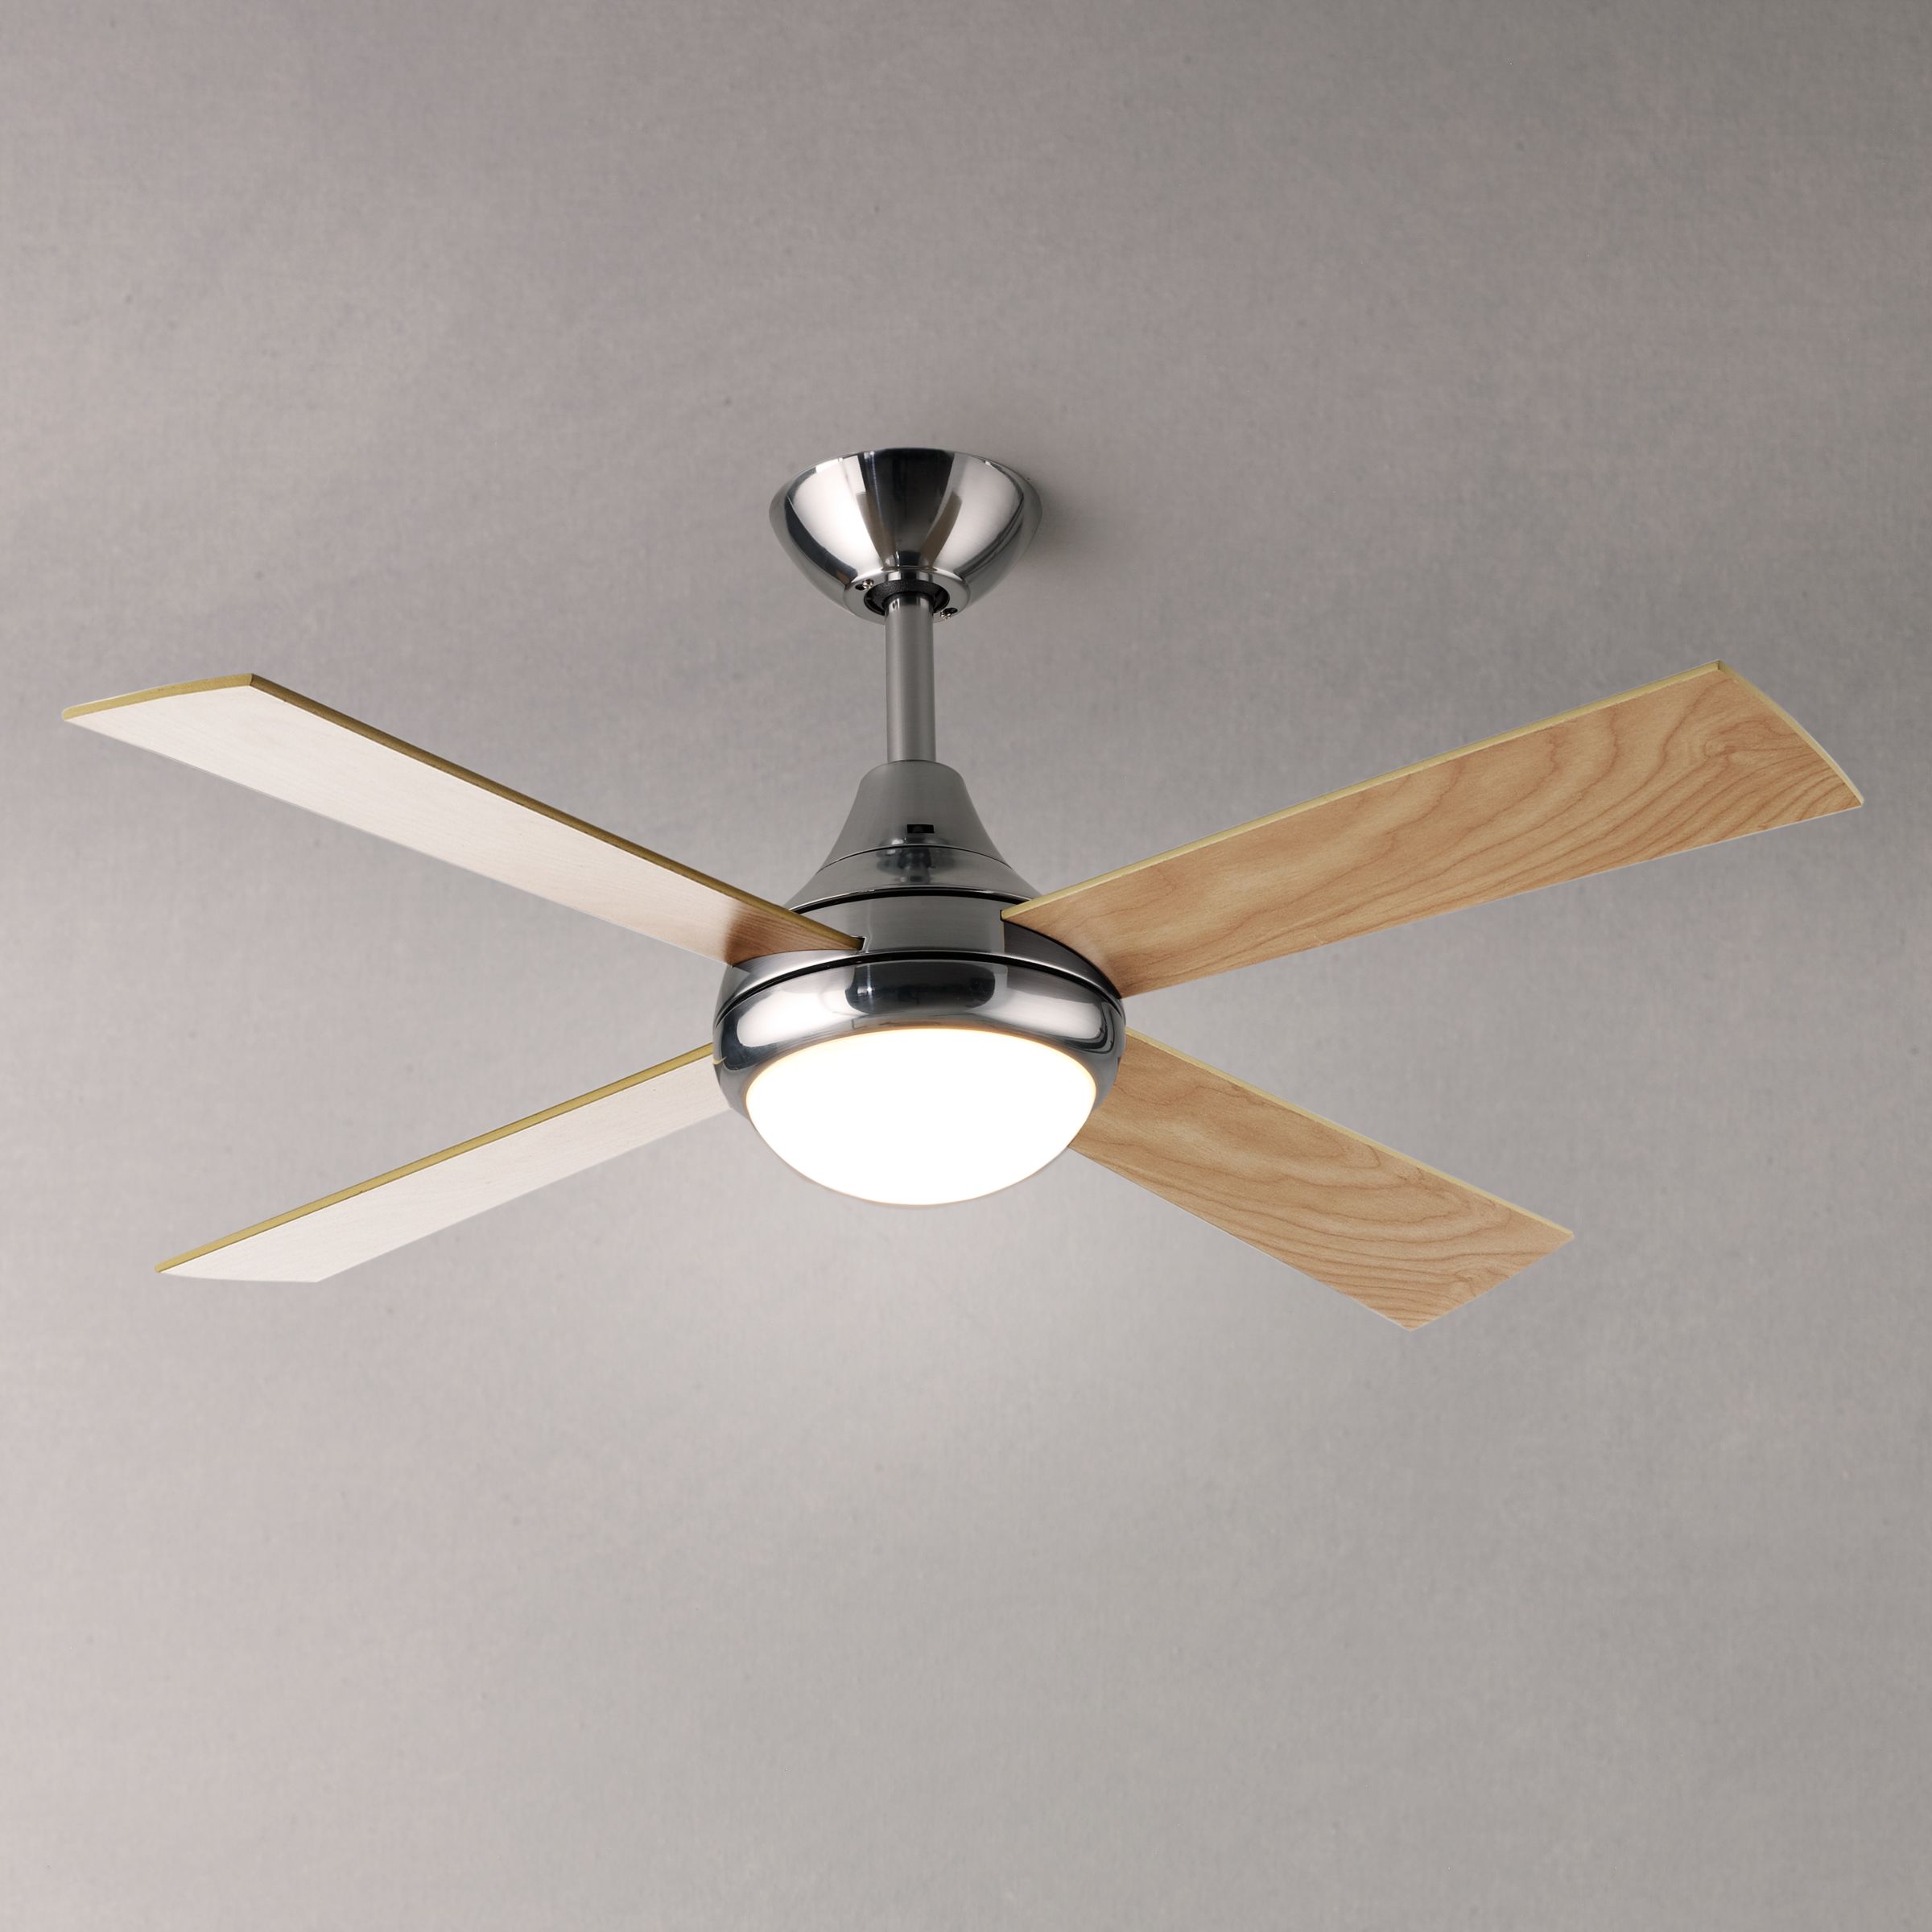 Fantasia Sigma Ceiling Fan and Light, Stainless Steel at John Lewis